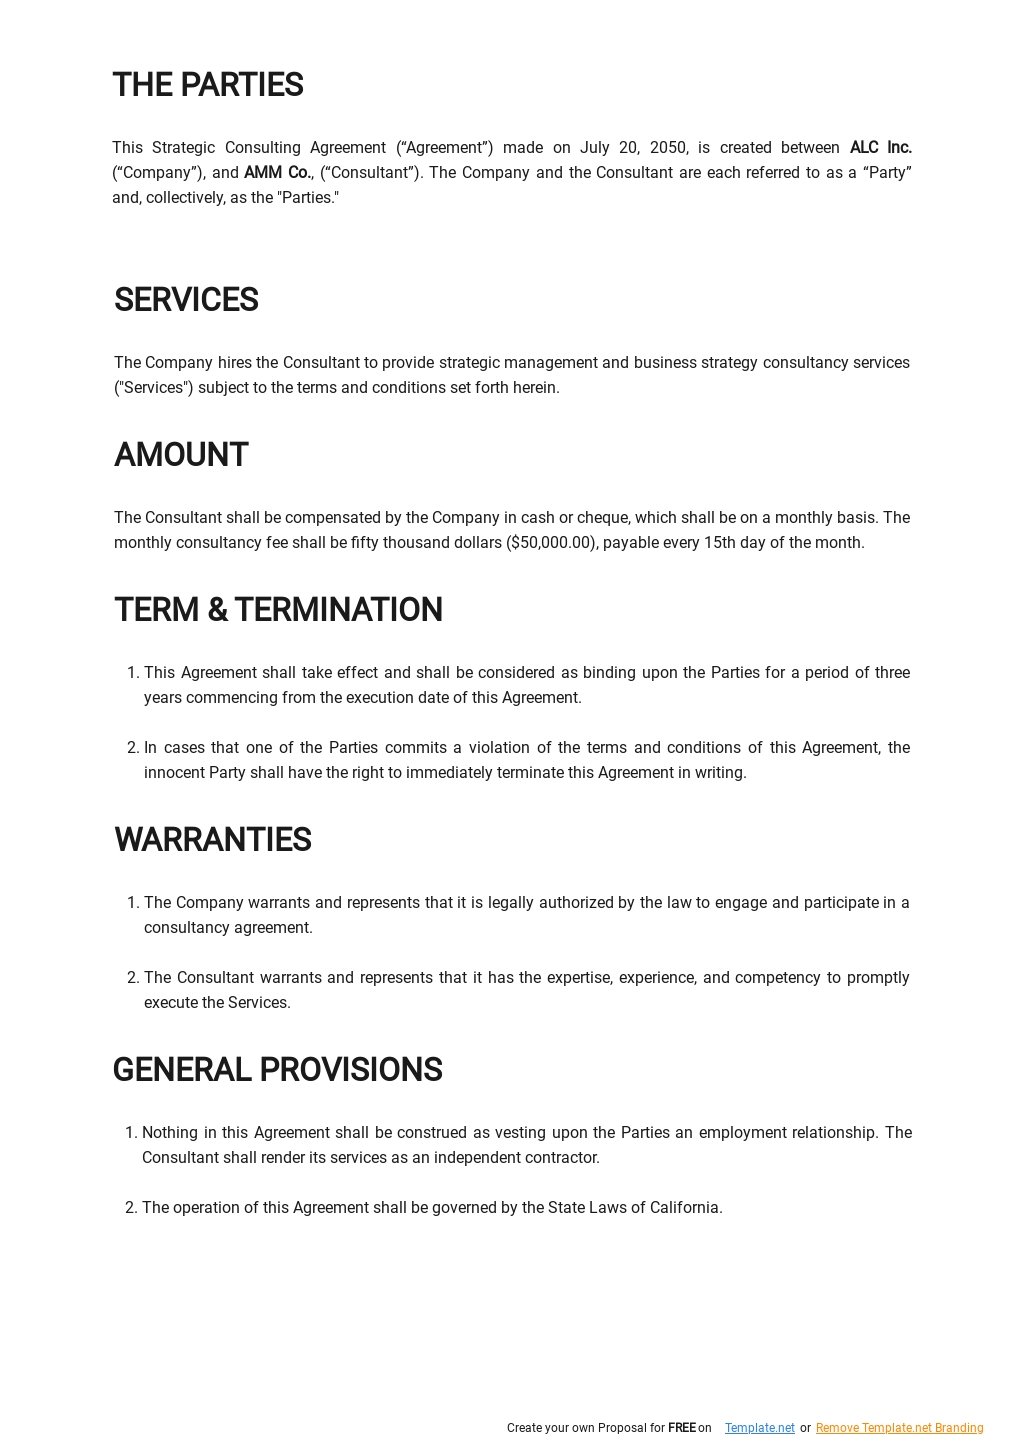 Strategic Consulting Agreement Template 1.jpe